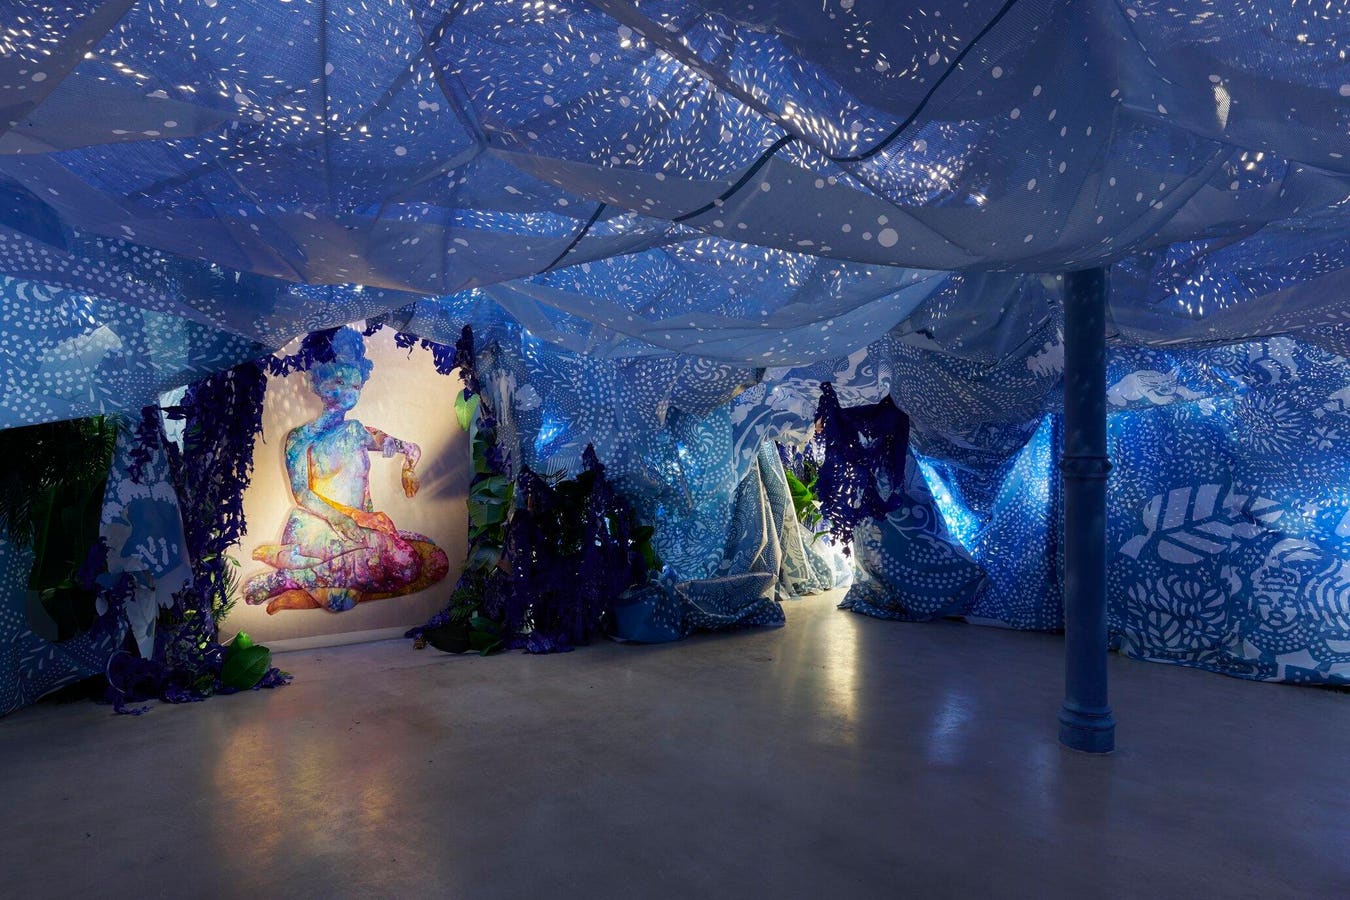 Enter The Worlds Of Firelei Báez At Institute Of Contemporary Art/Boston